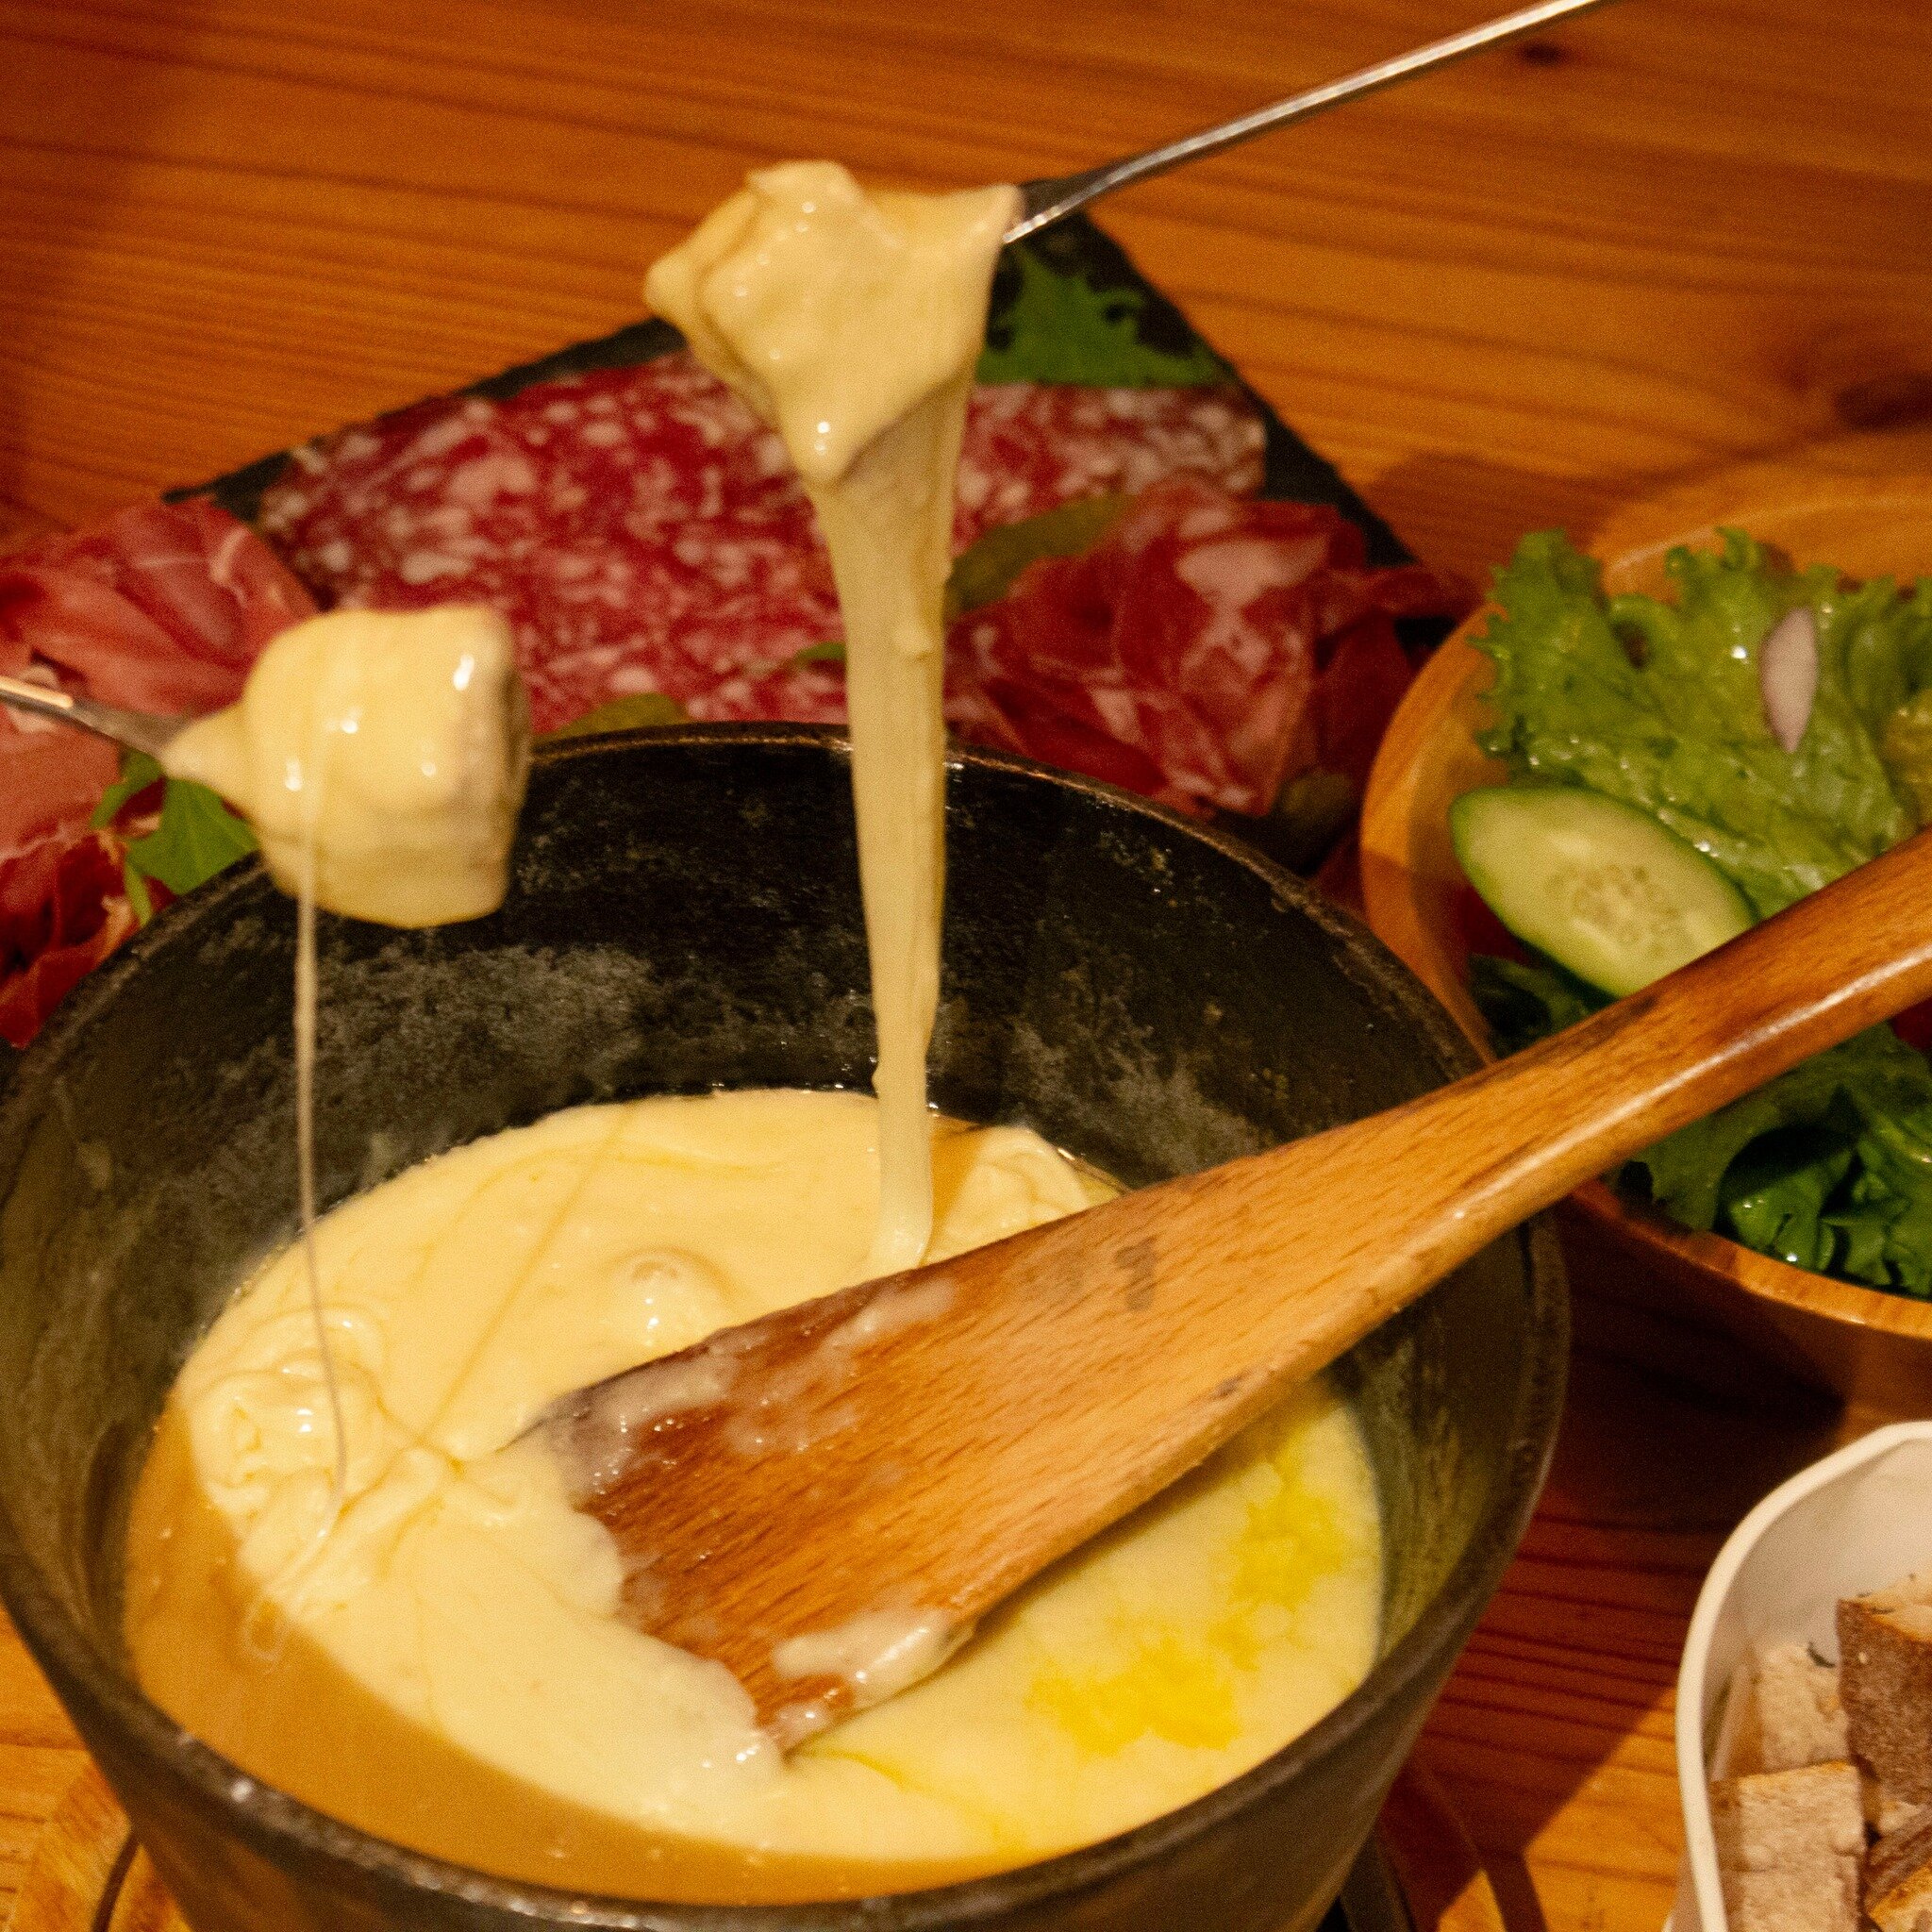 Indulge in the perfect cheese fondue for a chilly day! Let the warmth of gooey cheese whisk away the cold of Niseko❄️🧀 Embrace the cozy ambiance and savor the rich flavors that melt away the winter chill.☃️
.
寒い日にぴったりのチーズフォンデュをご堪能ください！トロトロのチーズの温かさがニ